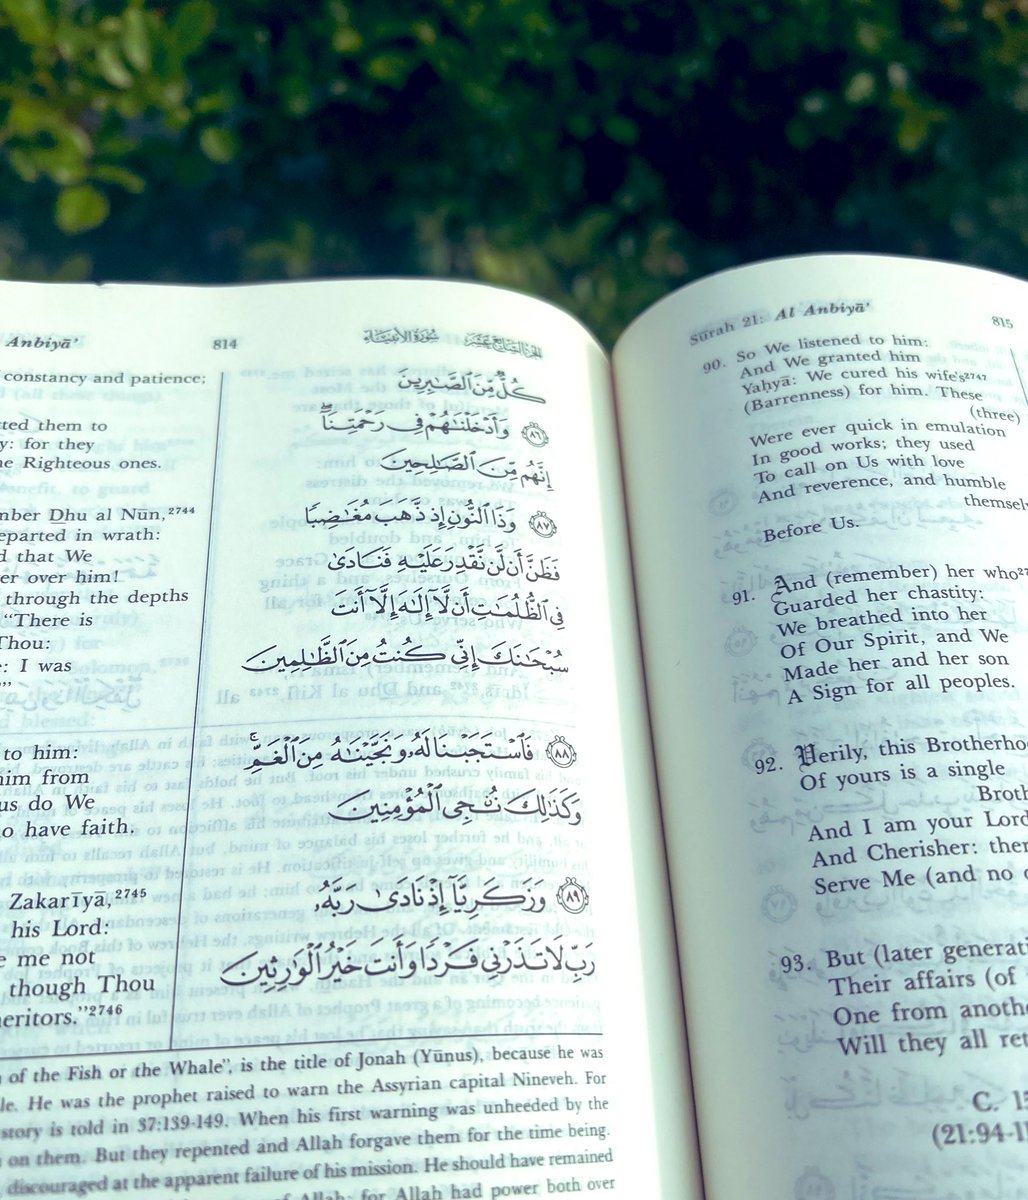 A powerful #prayer in times of need that can have a great effect on one’s heart, a dhikr known as the Yunusi Dhikr mentioned in the Holy #Quran, verse 87 of Surah Al-Anbiyaa:. 
'There is no deity except You; exalted are You. Indeed, I have been of the wrongdoers.'